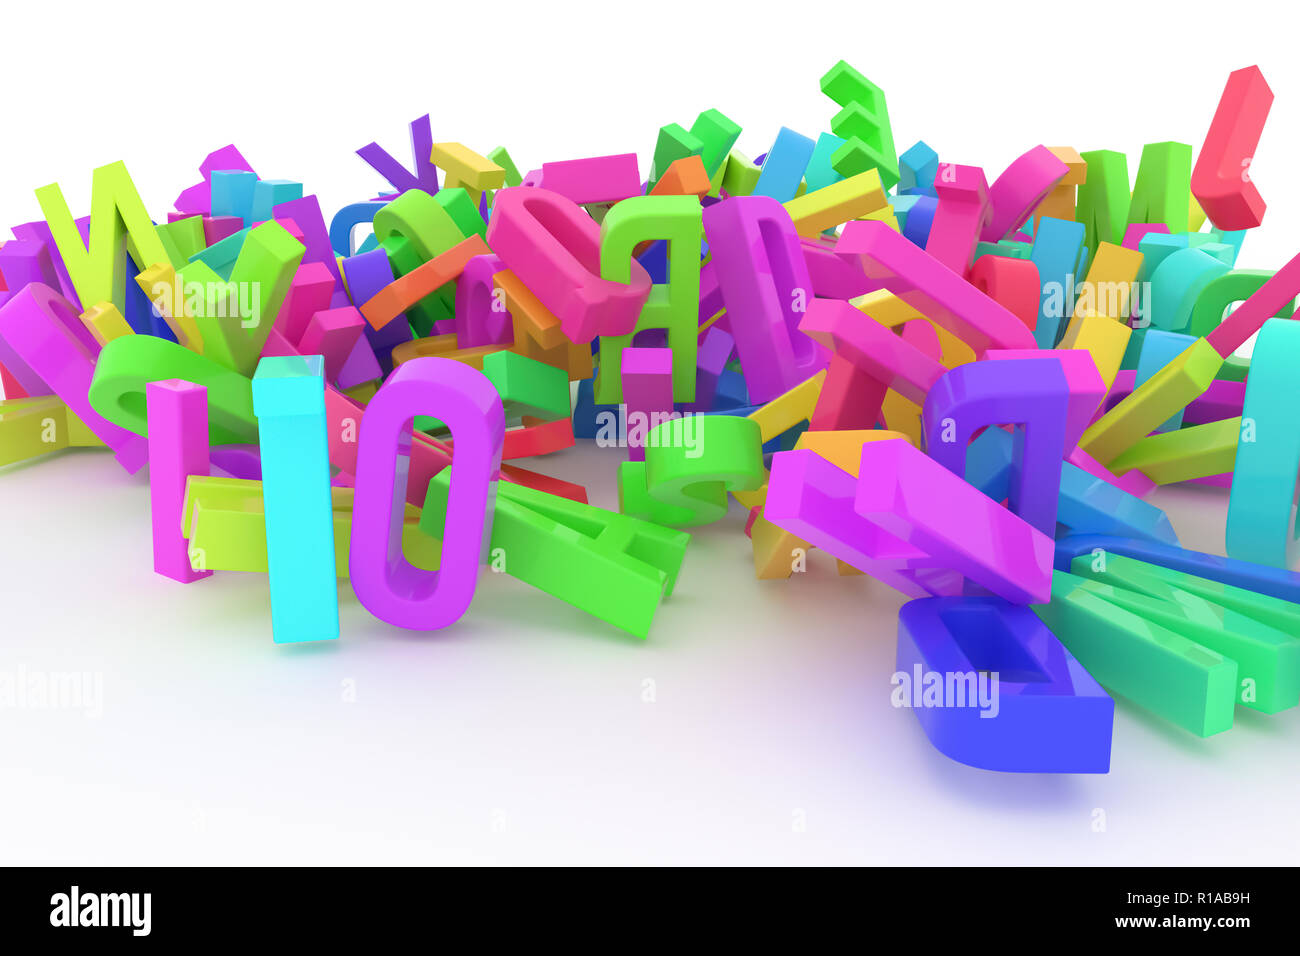 Abstract Cgi Typography Letter Of Abc Alphabet Good For Web